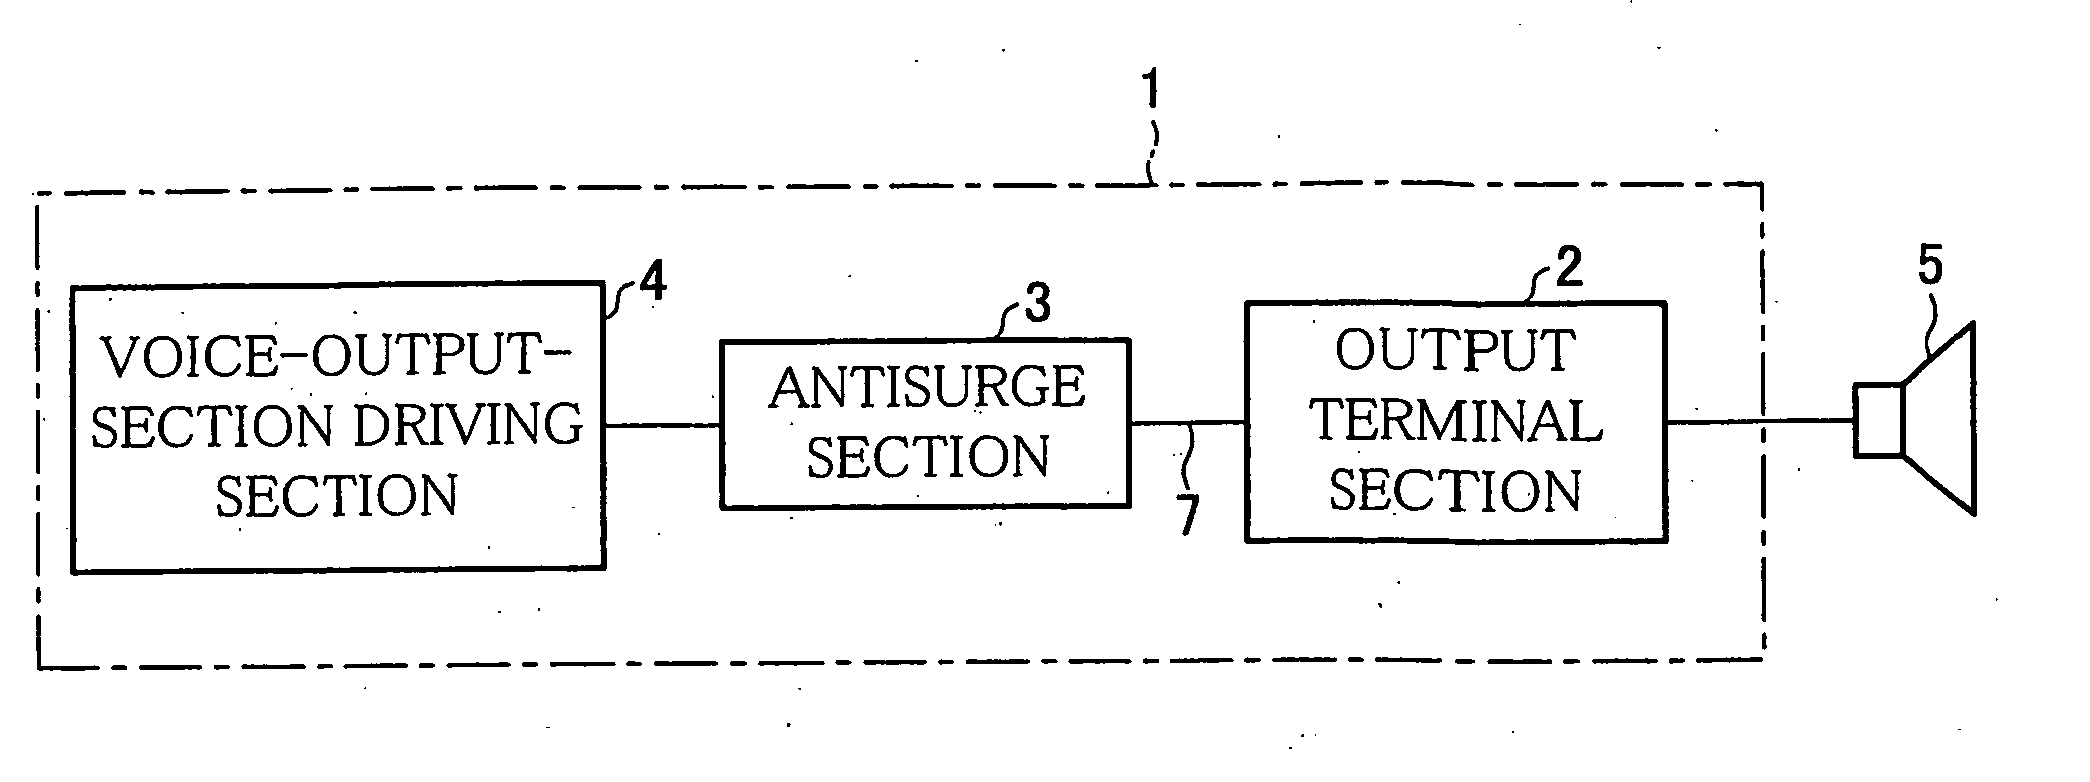 Thin film circuit substrate, piezoelectric speaker device, display device, and sound-generating display device